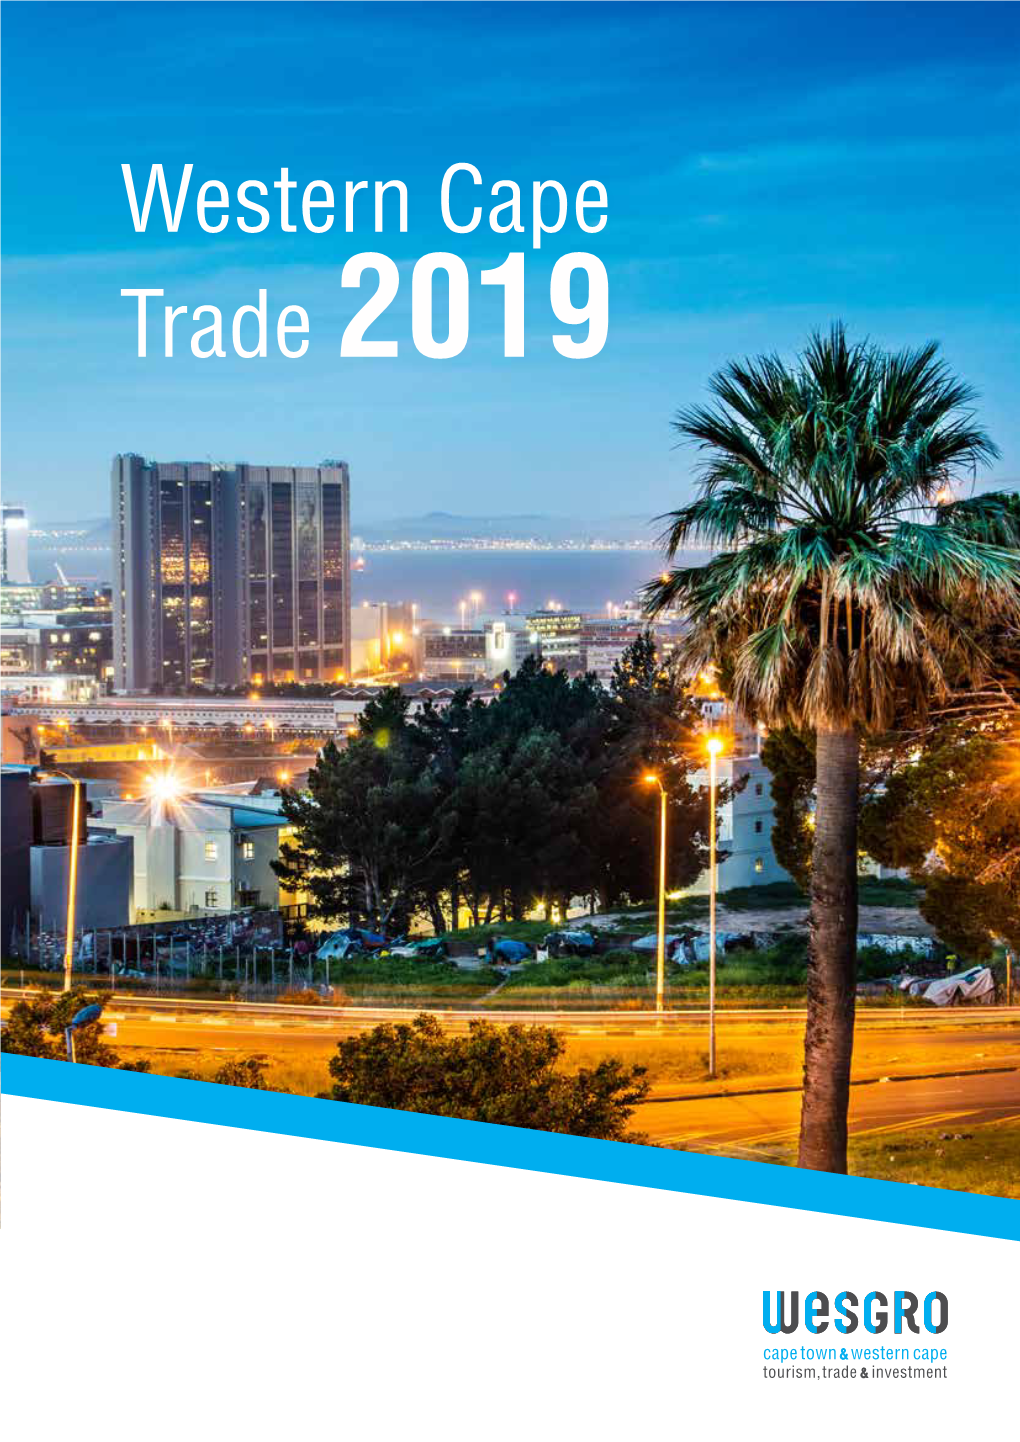 Western Cape Trade 2019 Contents